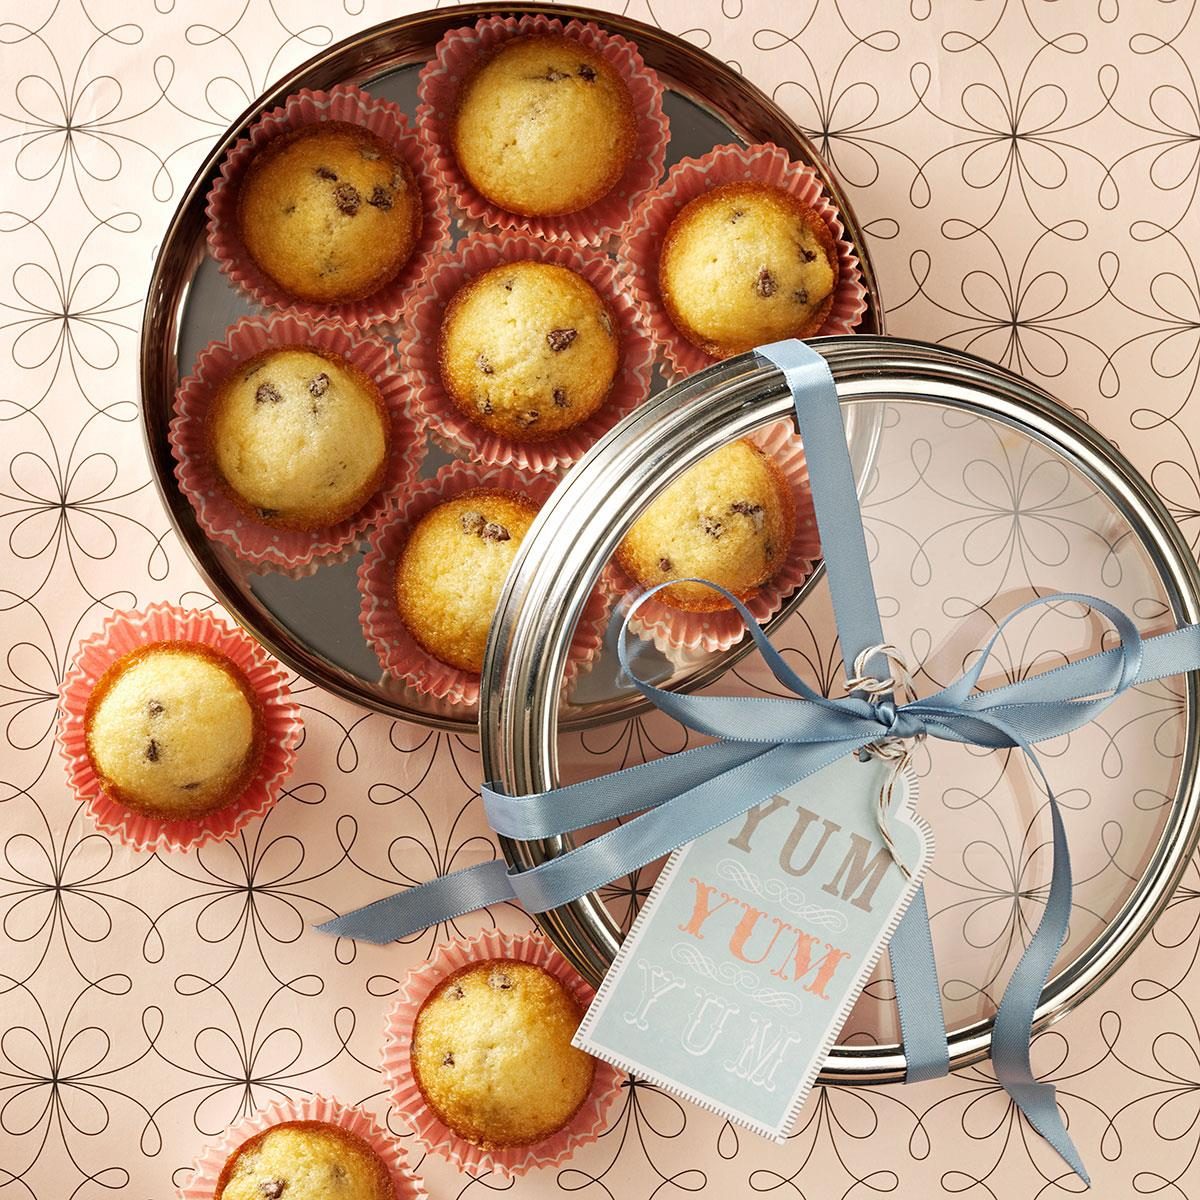 https://www.tasteofhome.com/wp-content/uploads/2018/01/Chocolate-Chip-Mini-Muffins_exps1558_HFG2661989C05_31_1bC_RMS-2.jpg